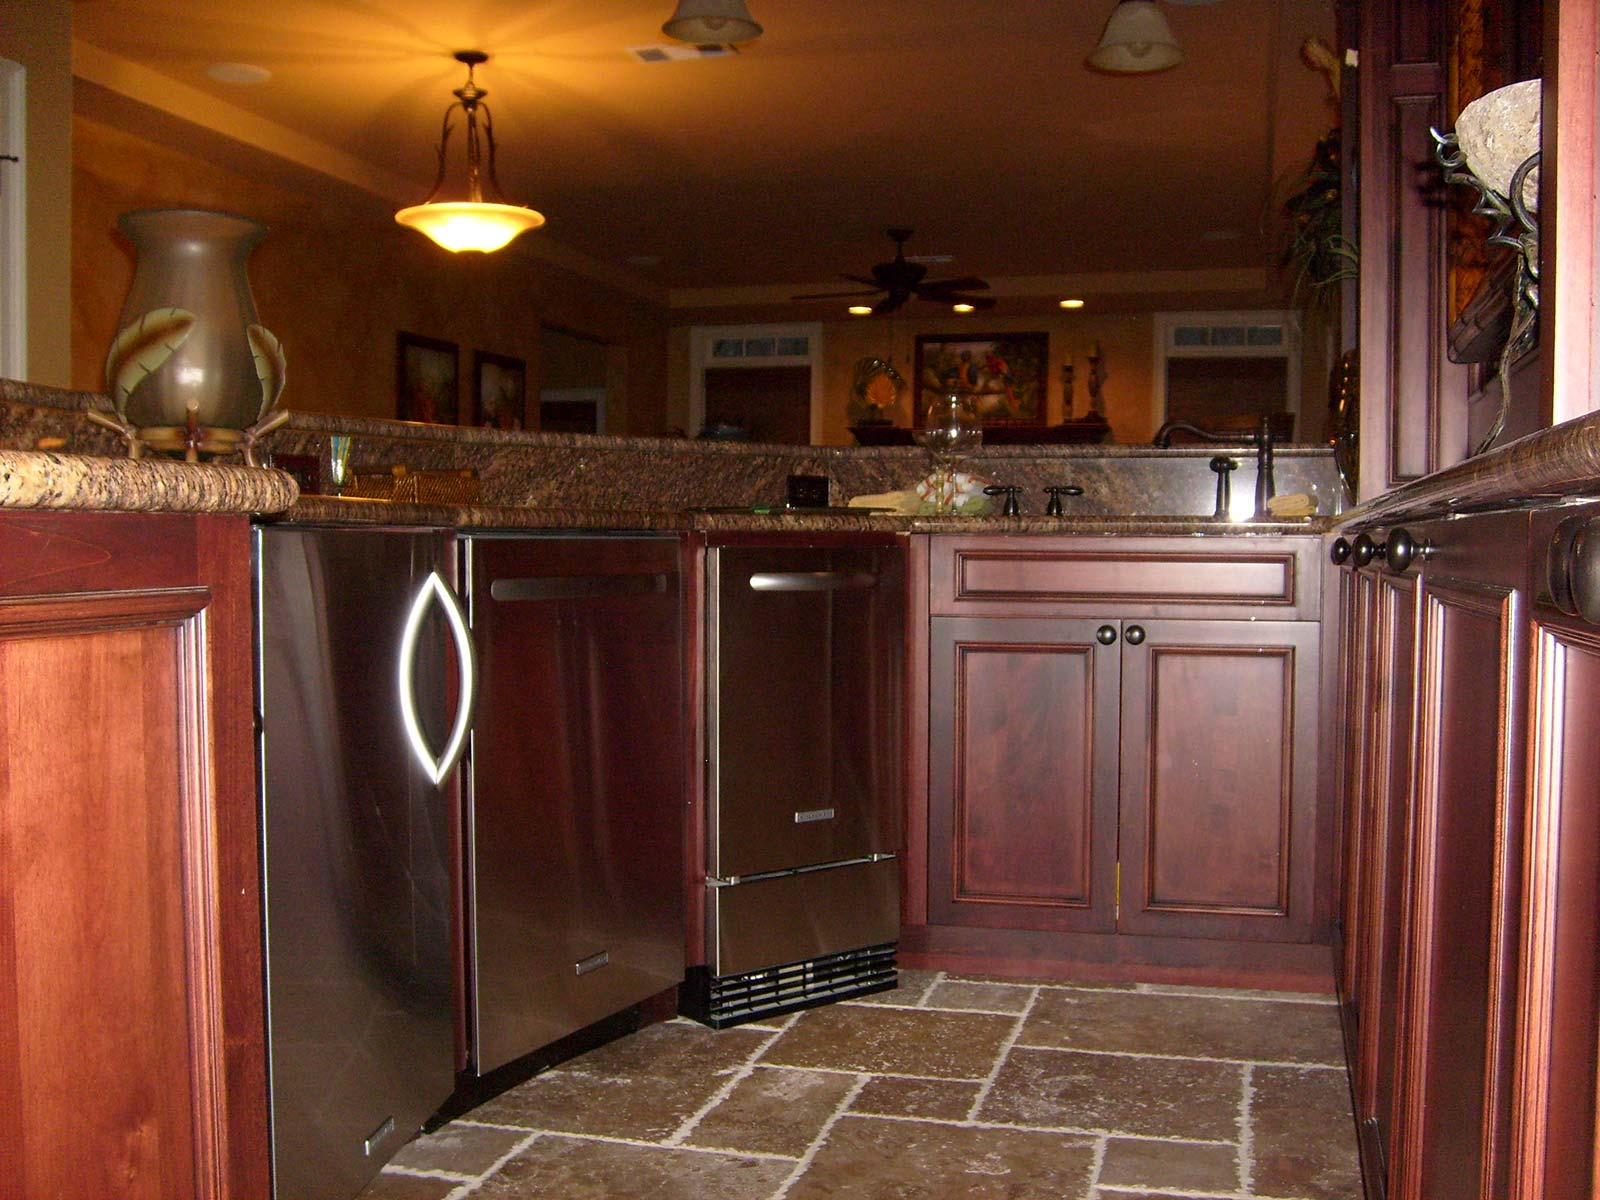 Low view behind bar showing appliances